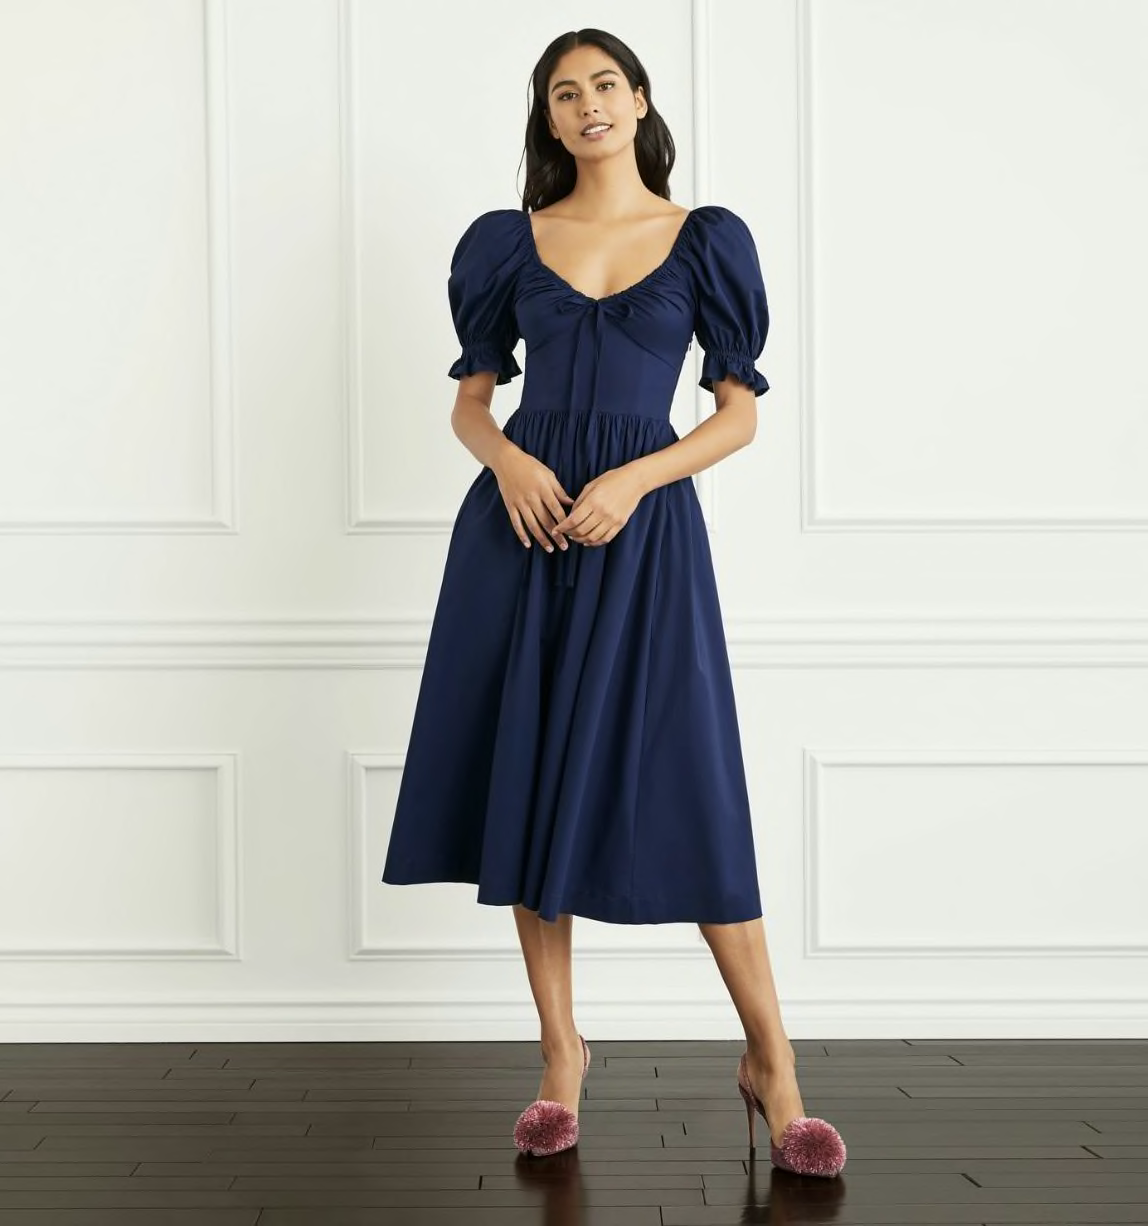 The Ophelia Dress from Hill House Home.